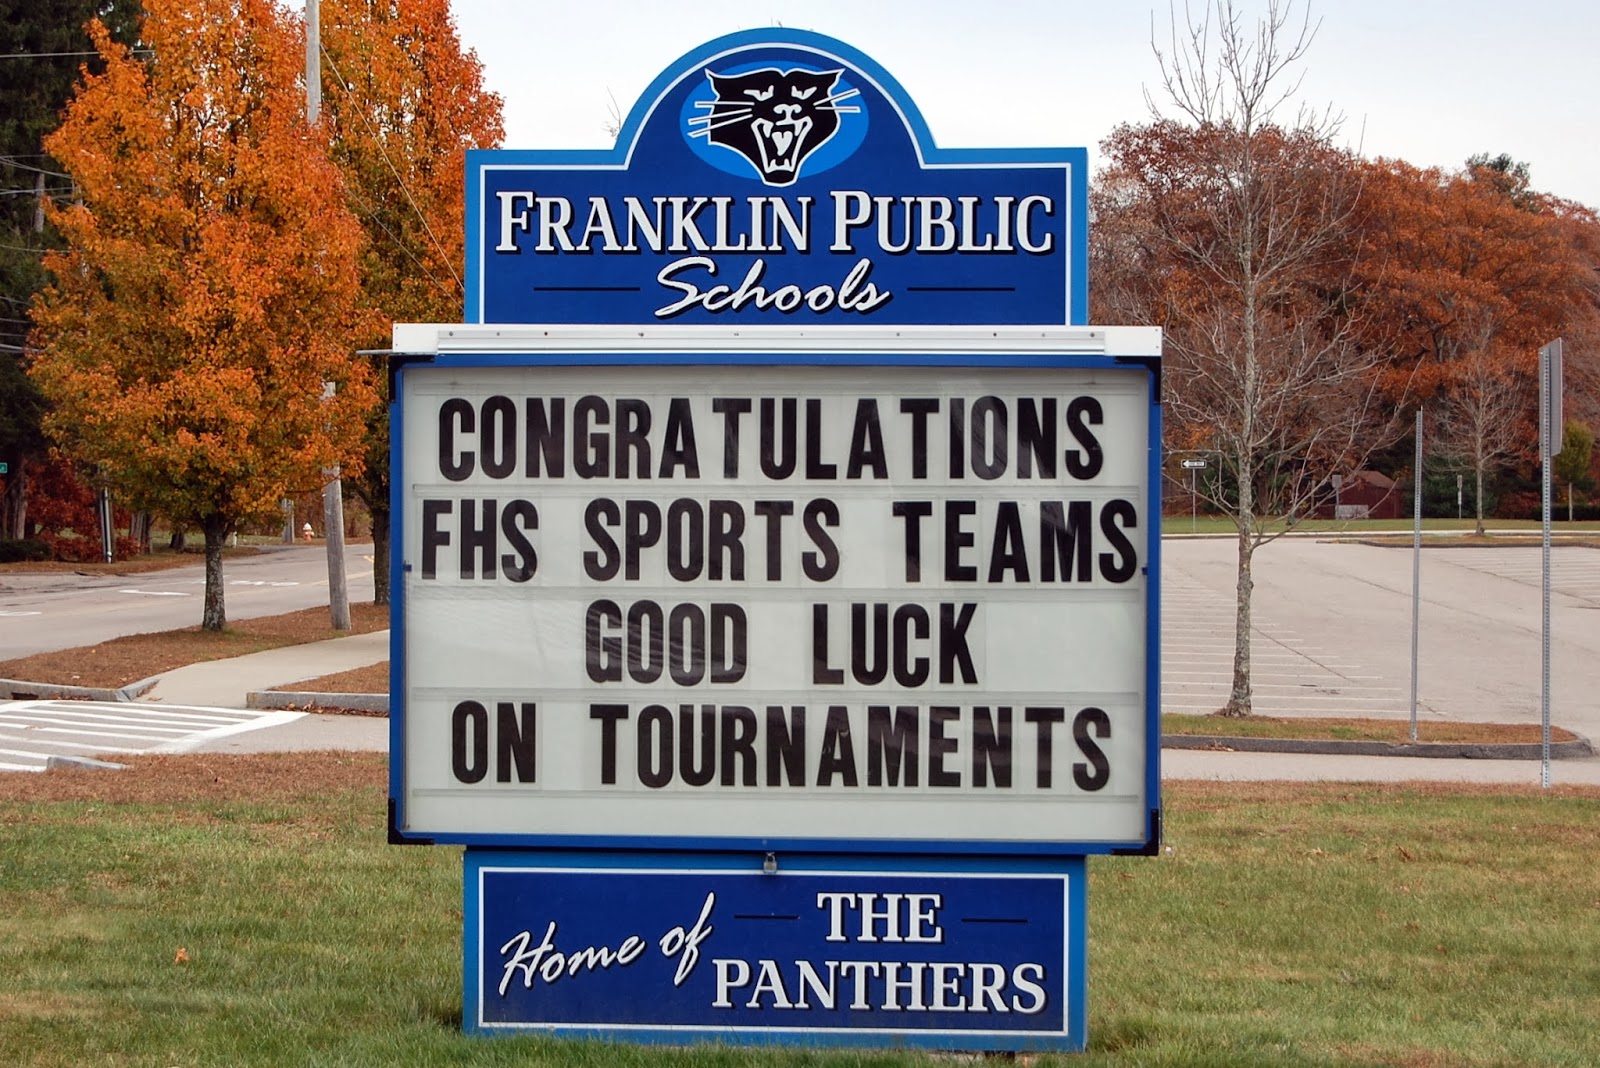 Franklin Public Schools - home of the Panthers